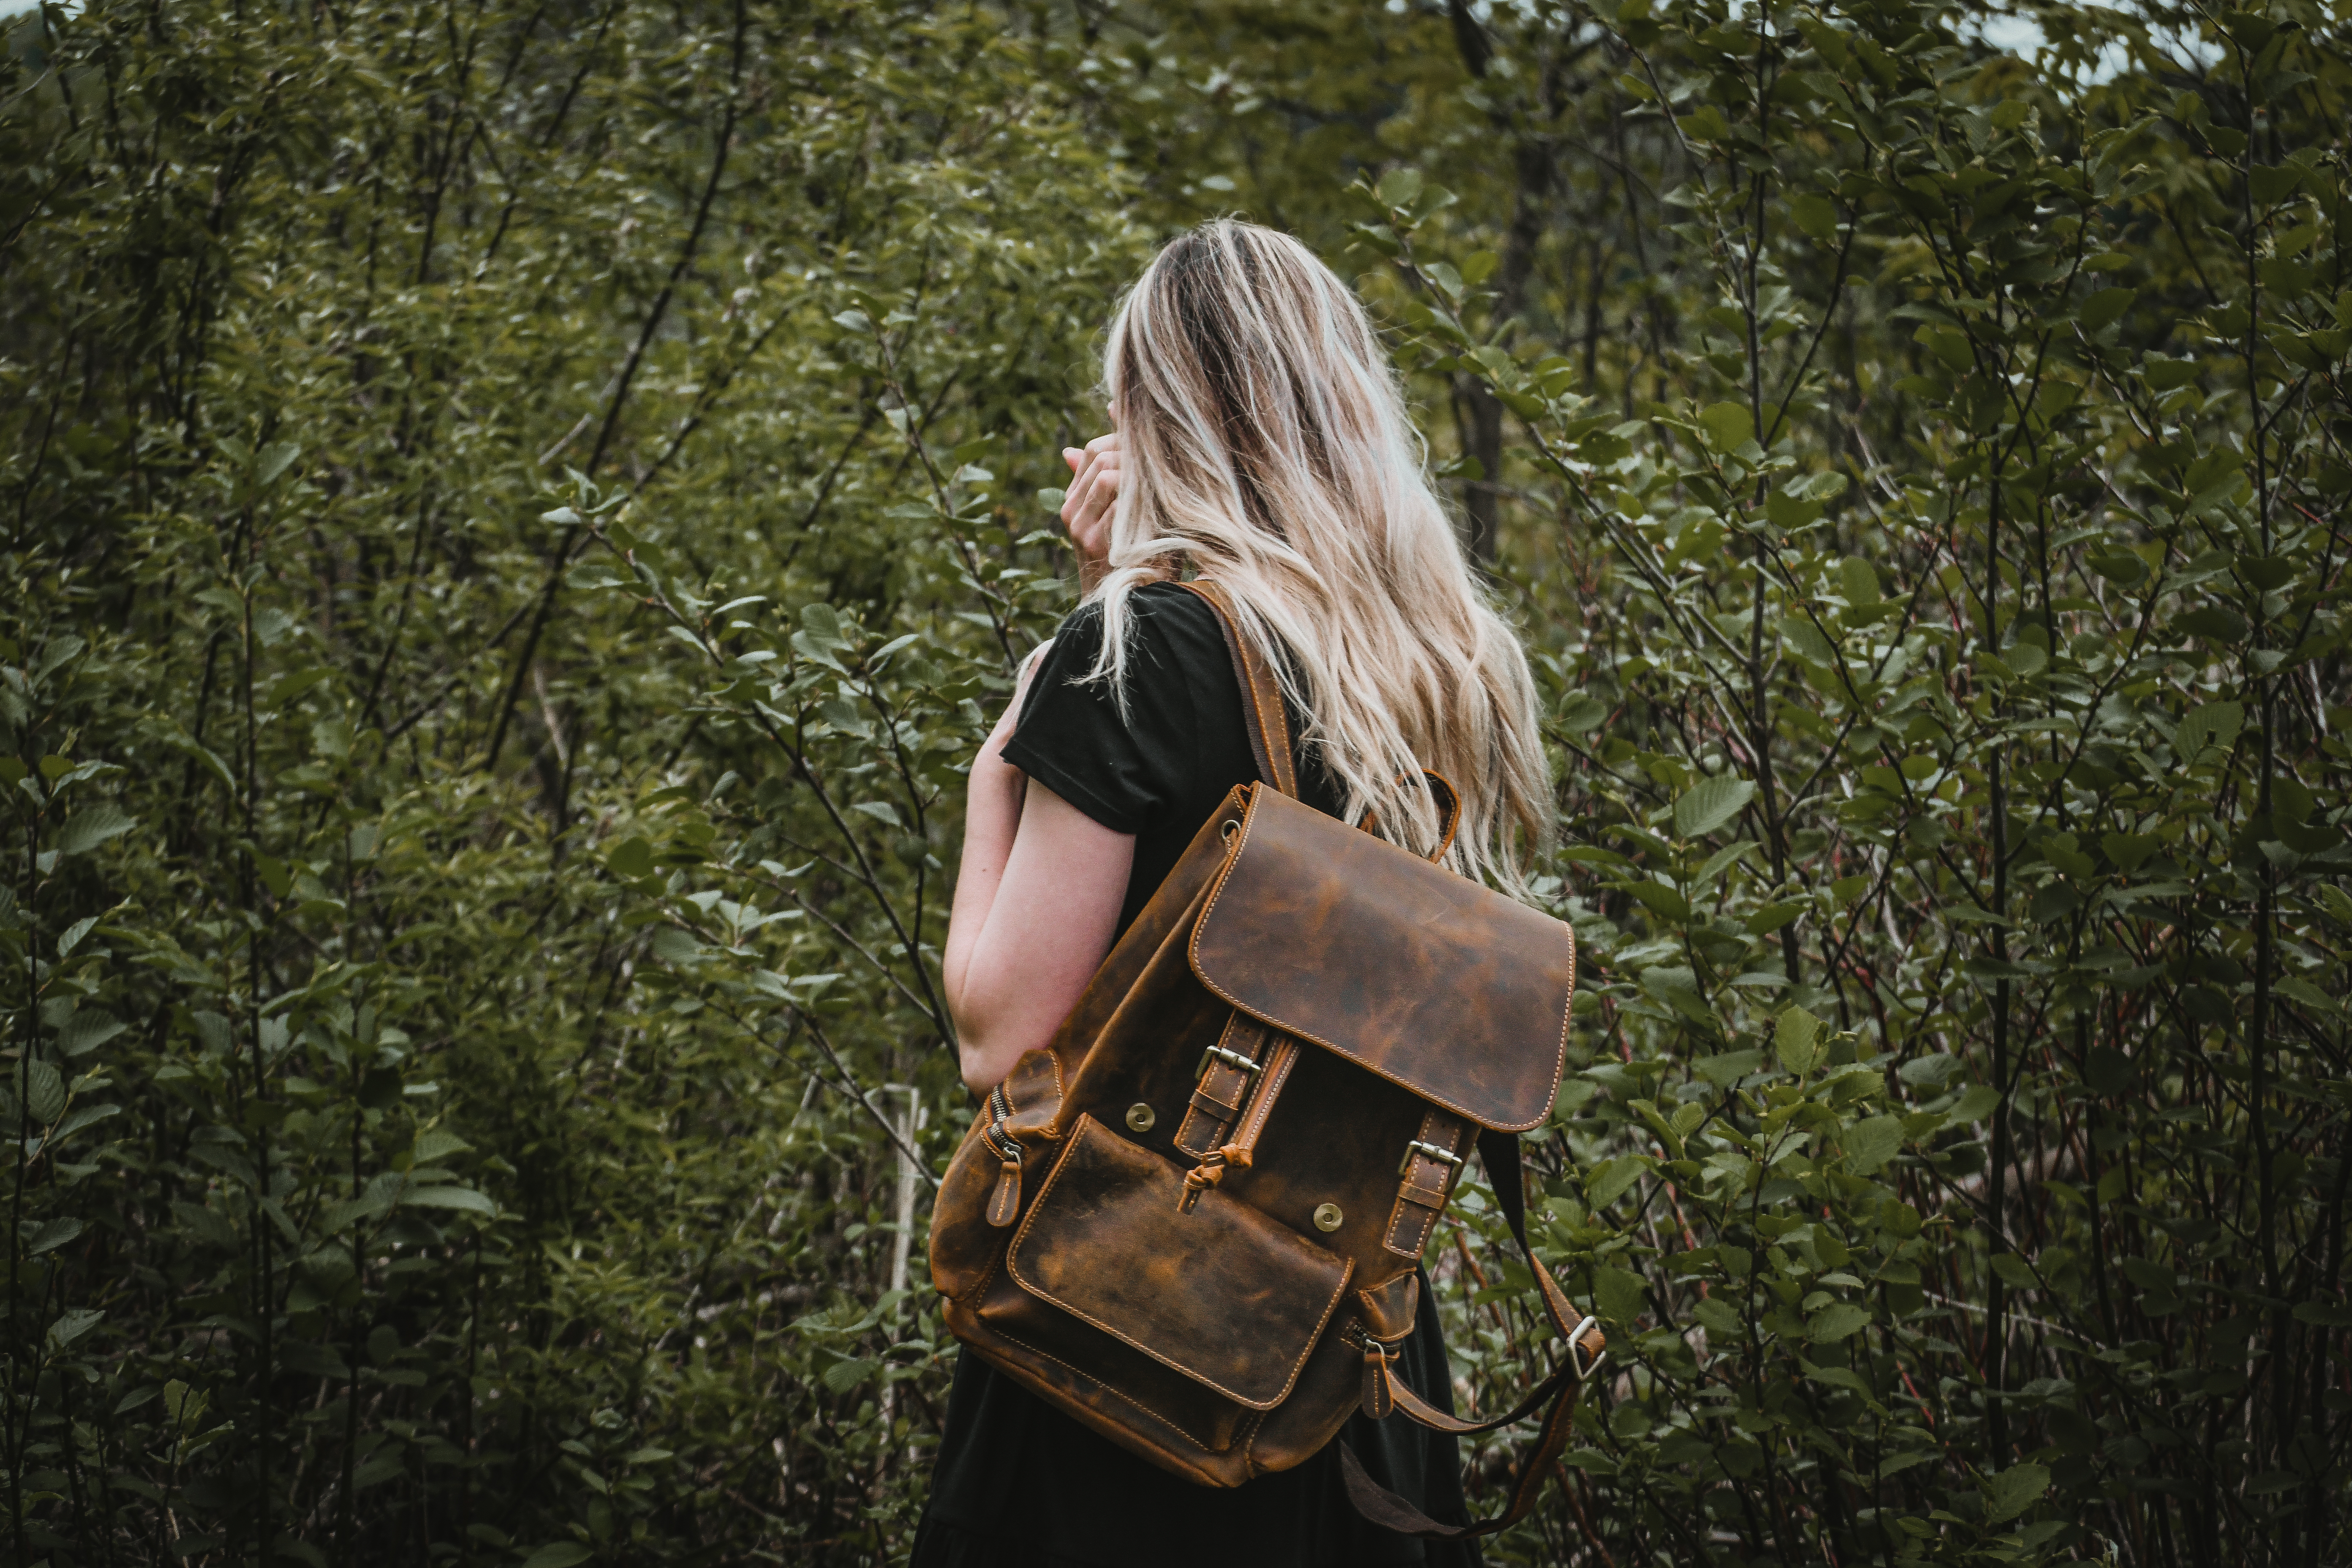 5 dumb things backpack designers need to stop doing – Snarky Nomad